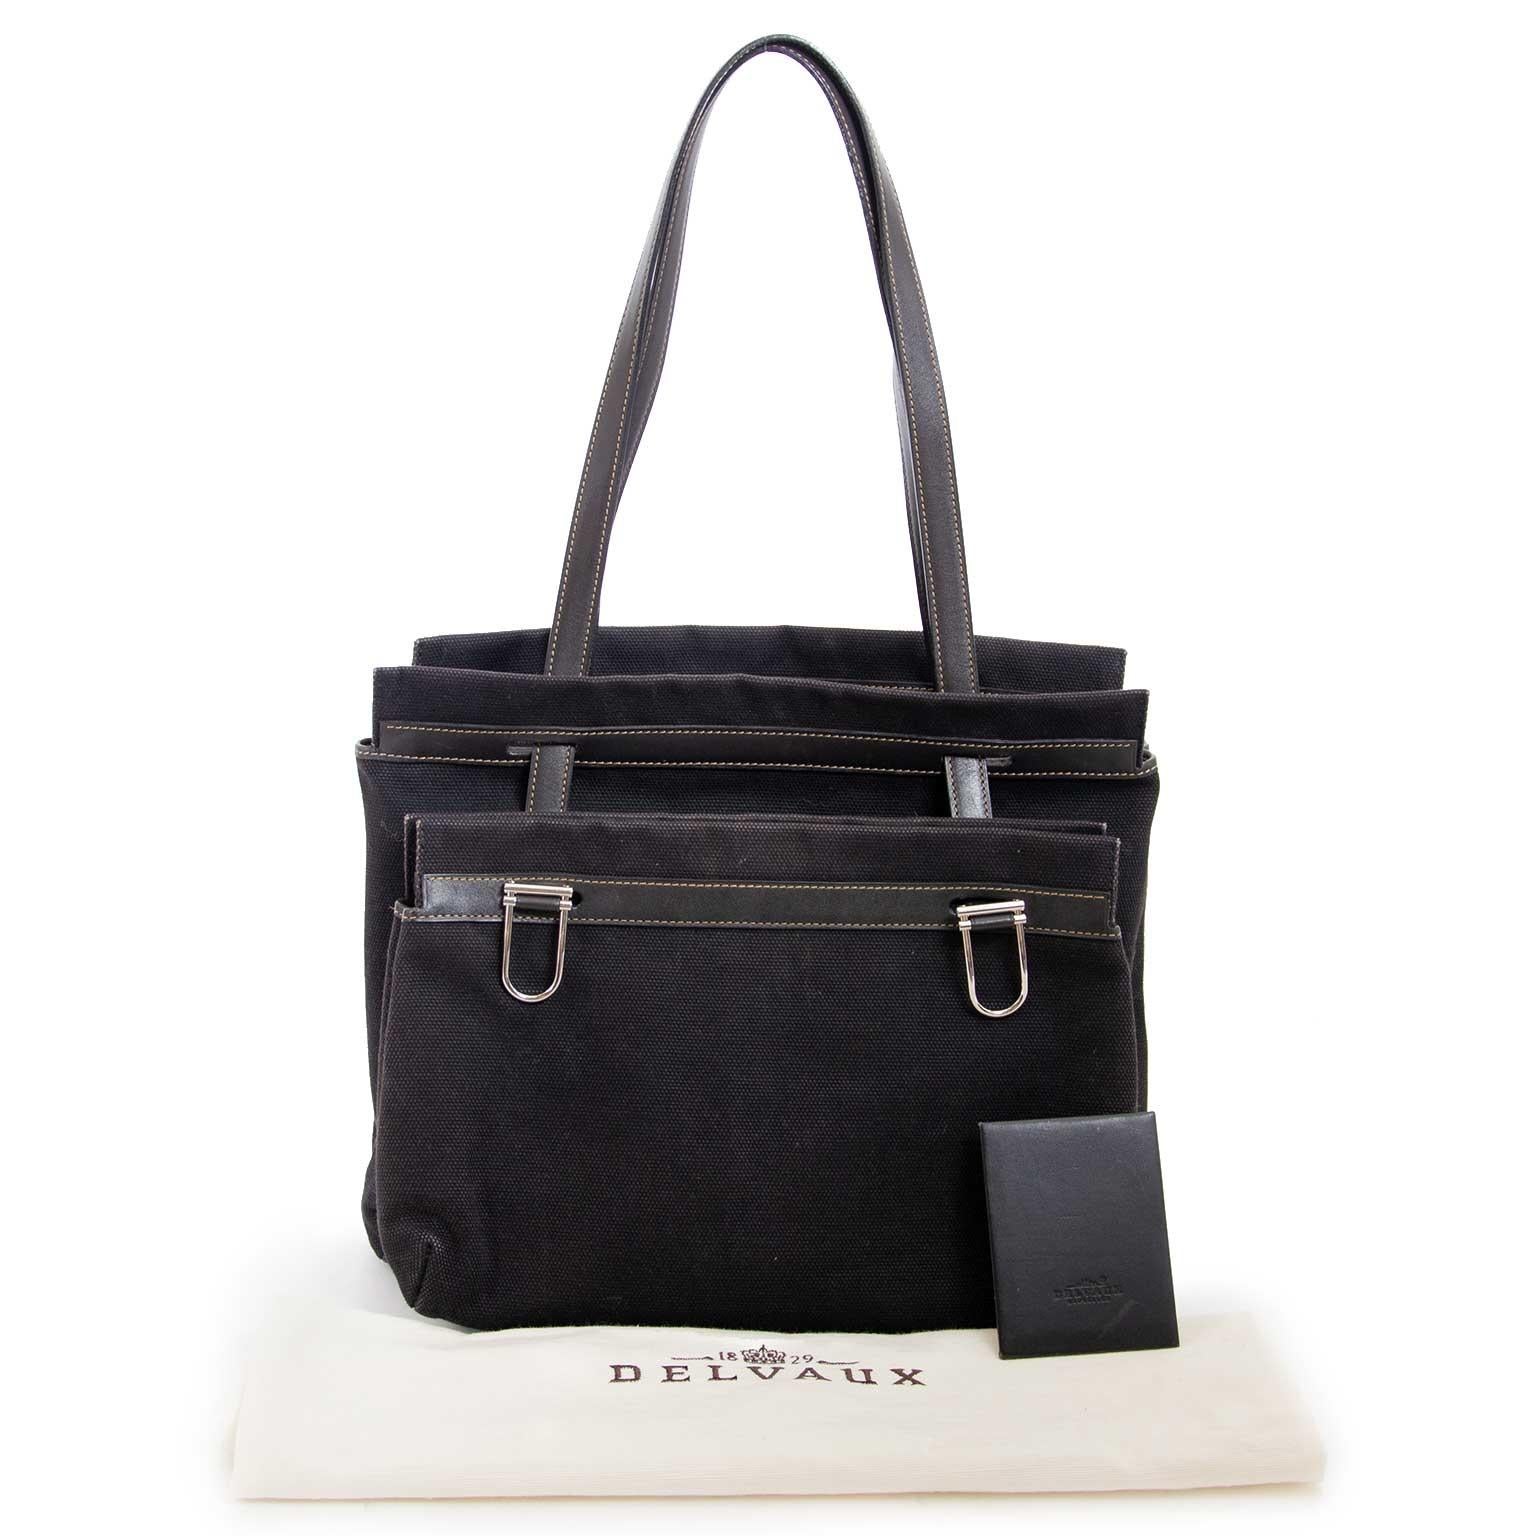 Good condition

Delvaux Black Fabric D Light Bag

This beautiful and classic Delvaux bag is crafted in black fabric and features leather stitched details. 
The bag consists of two seperate bags, that you can wear together or seperately. 
A truely